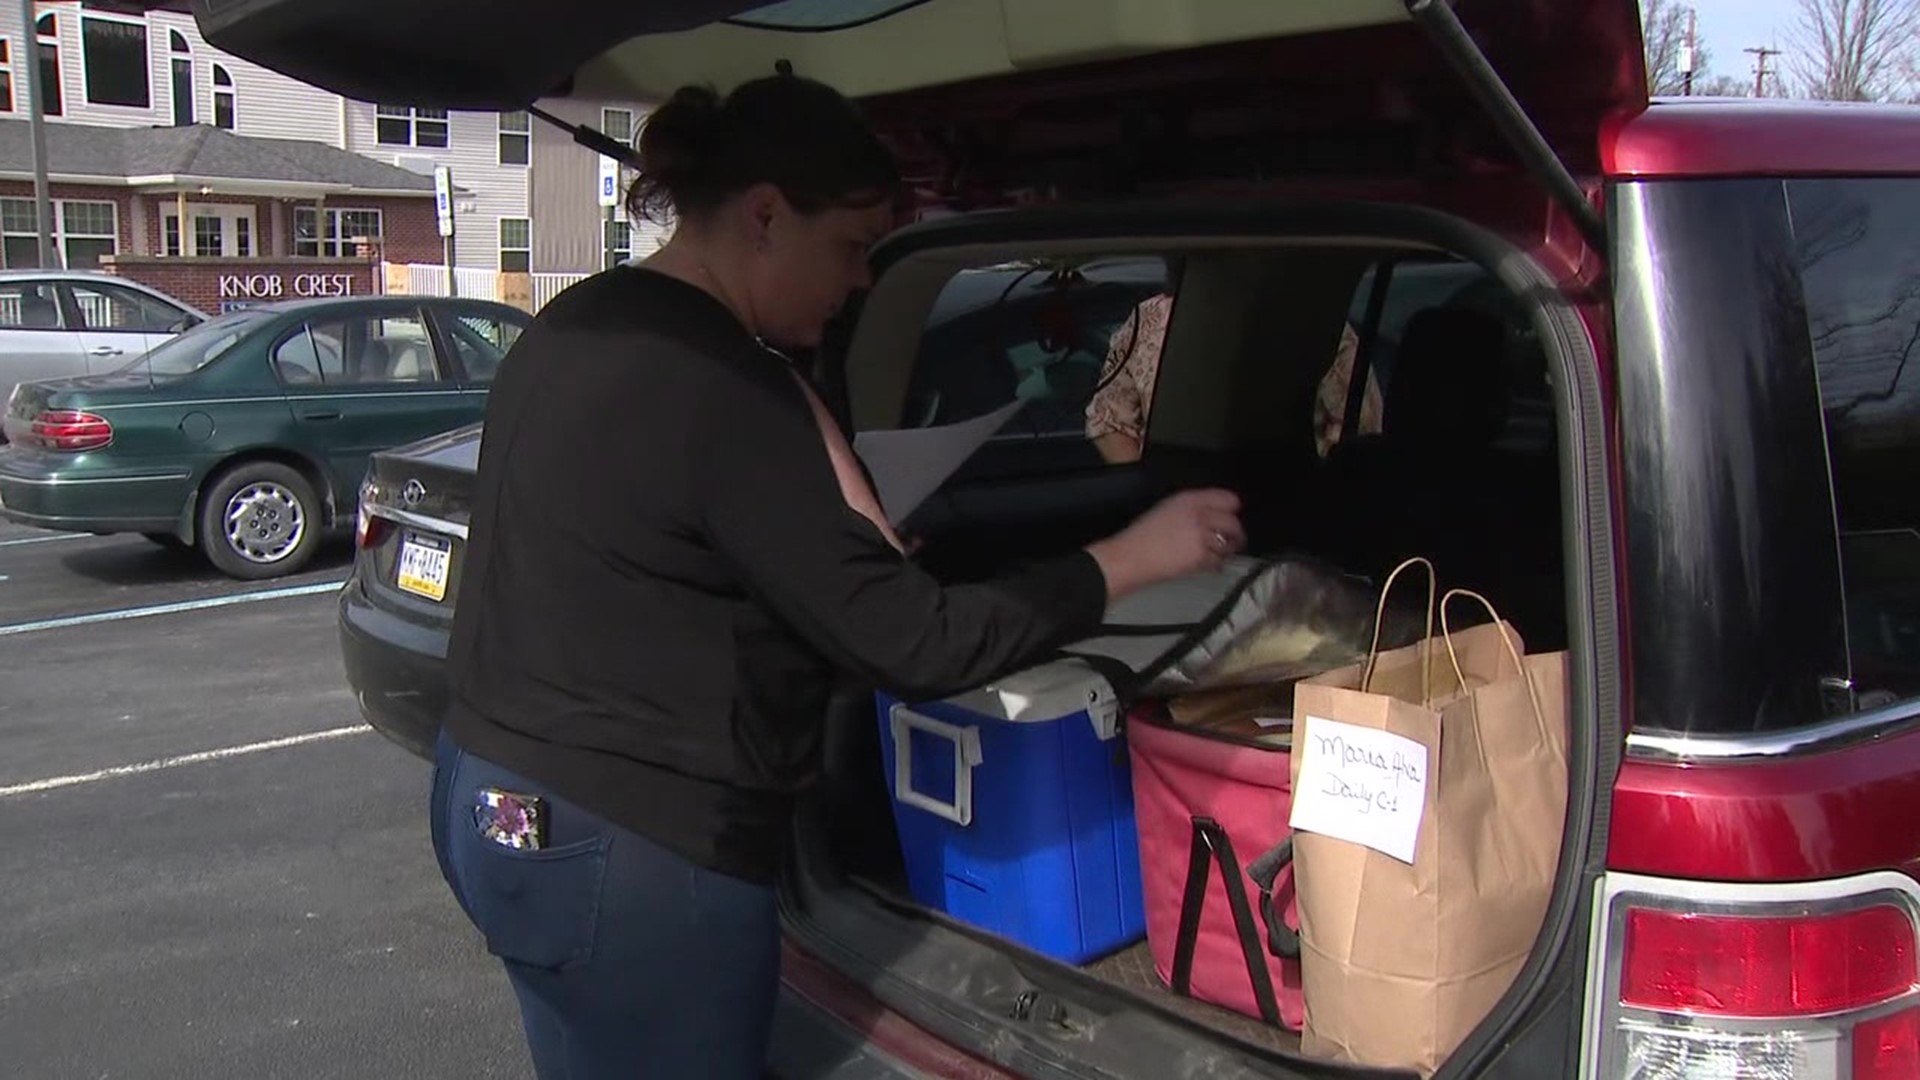 Meals on Wheels has anywhere from 80 to 100 volunteers a week who get behind the wheel to help serve the nonprofit's 300 clients. But it's still not enough.